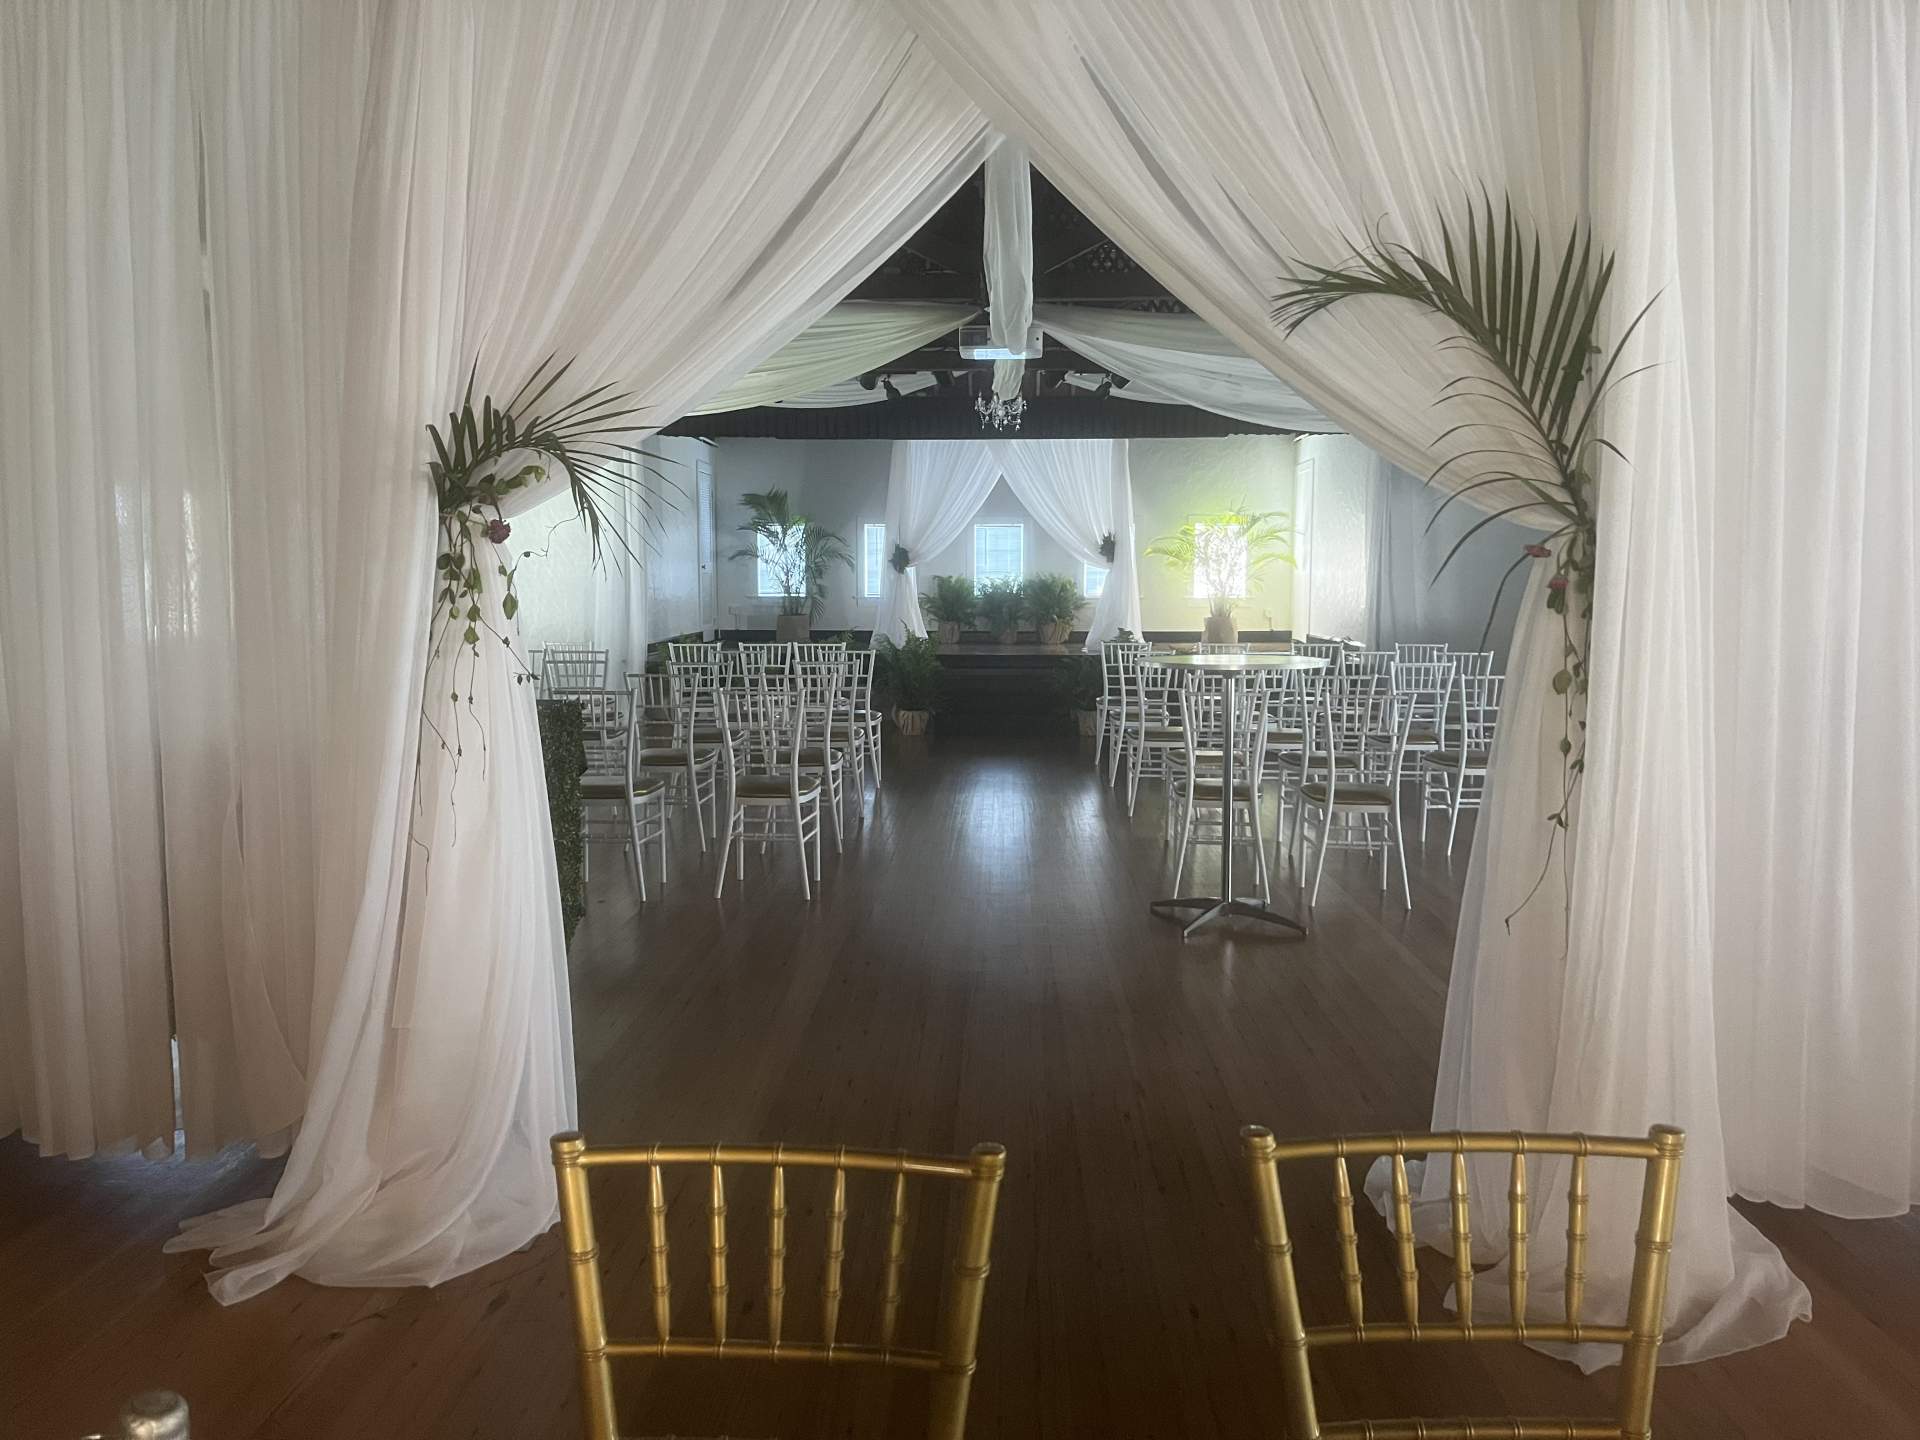 Rooms separated for ceremony